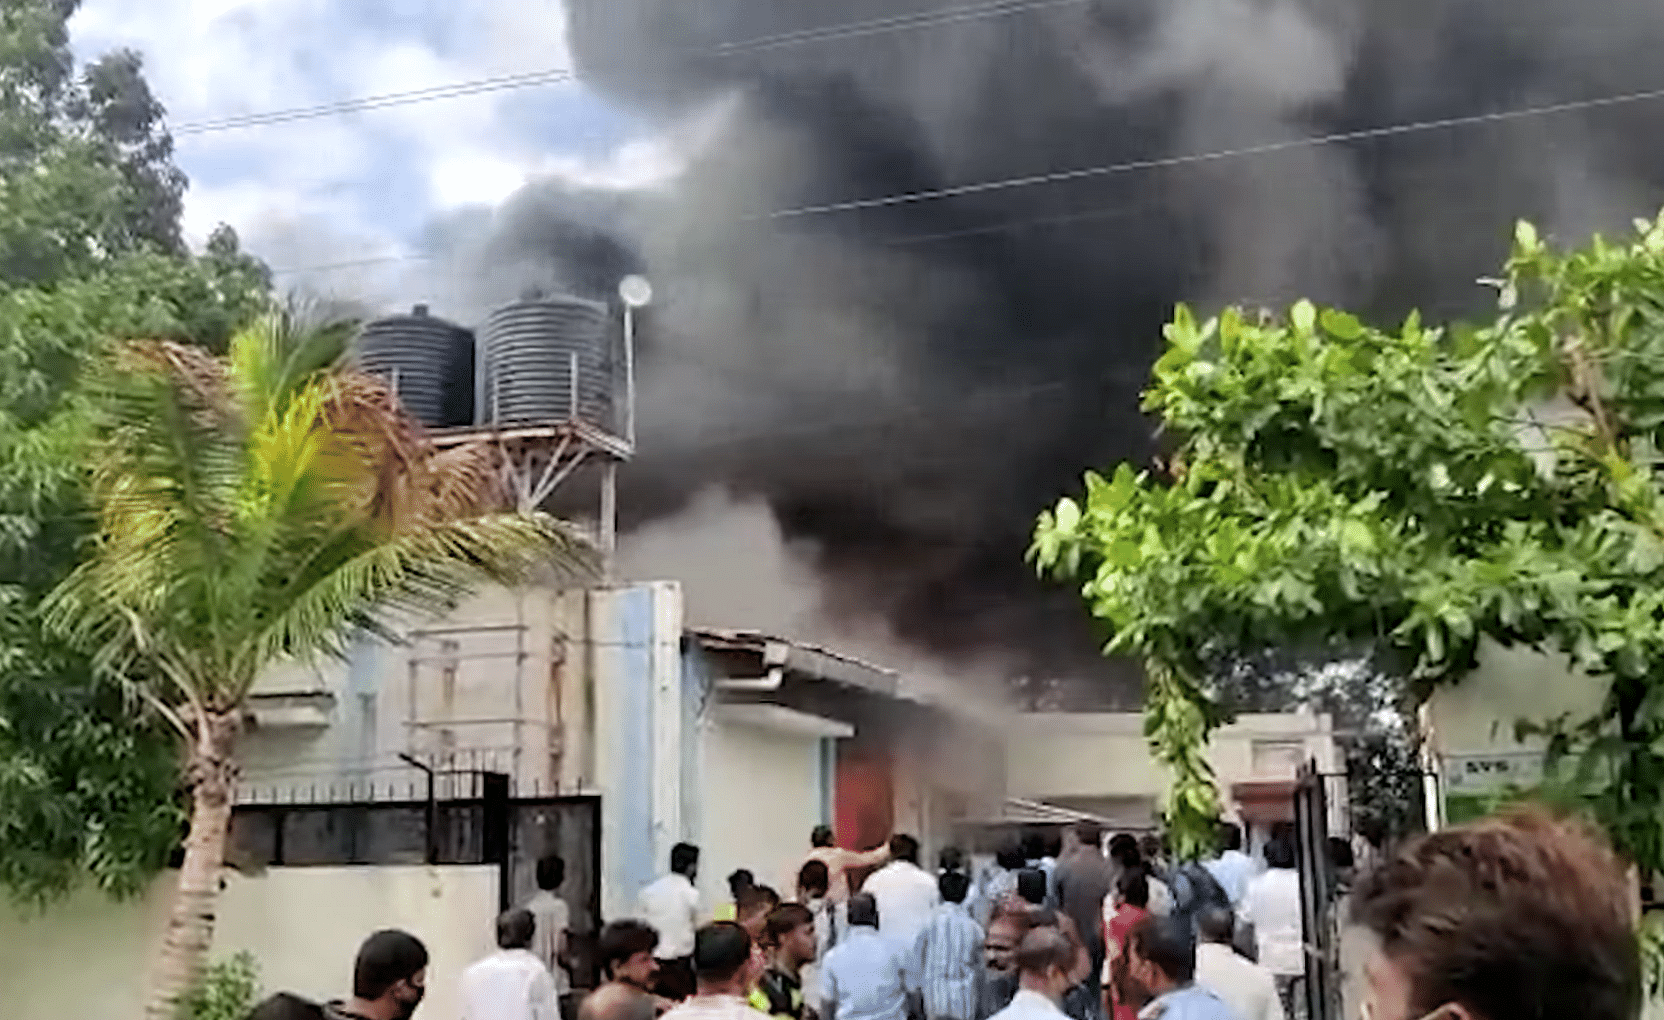 At least 18 people have died in a fire that broke out at a sanitiser manufacturing unit in Pune on Monday.